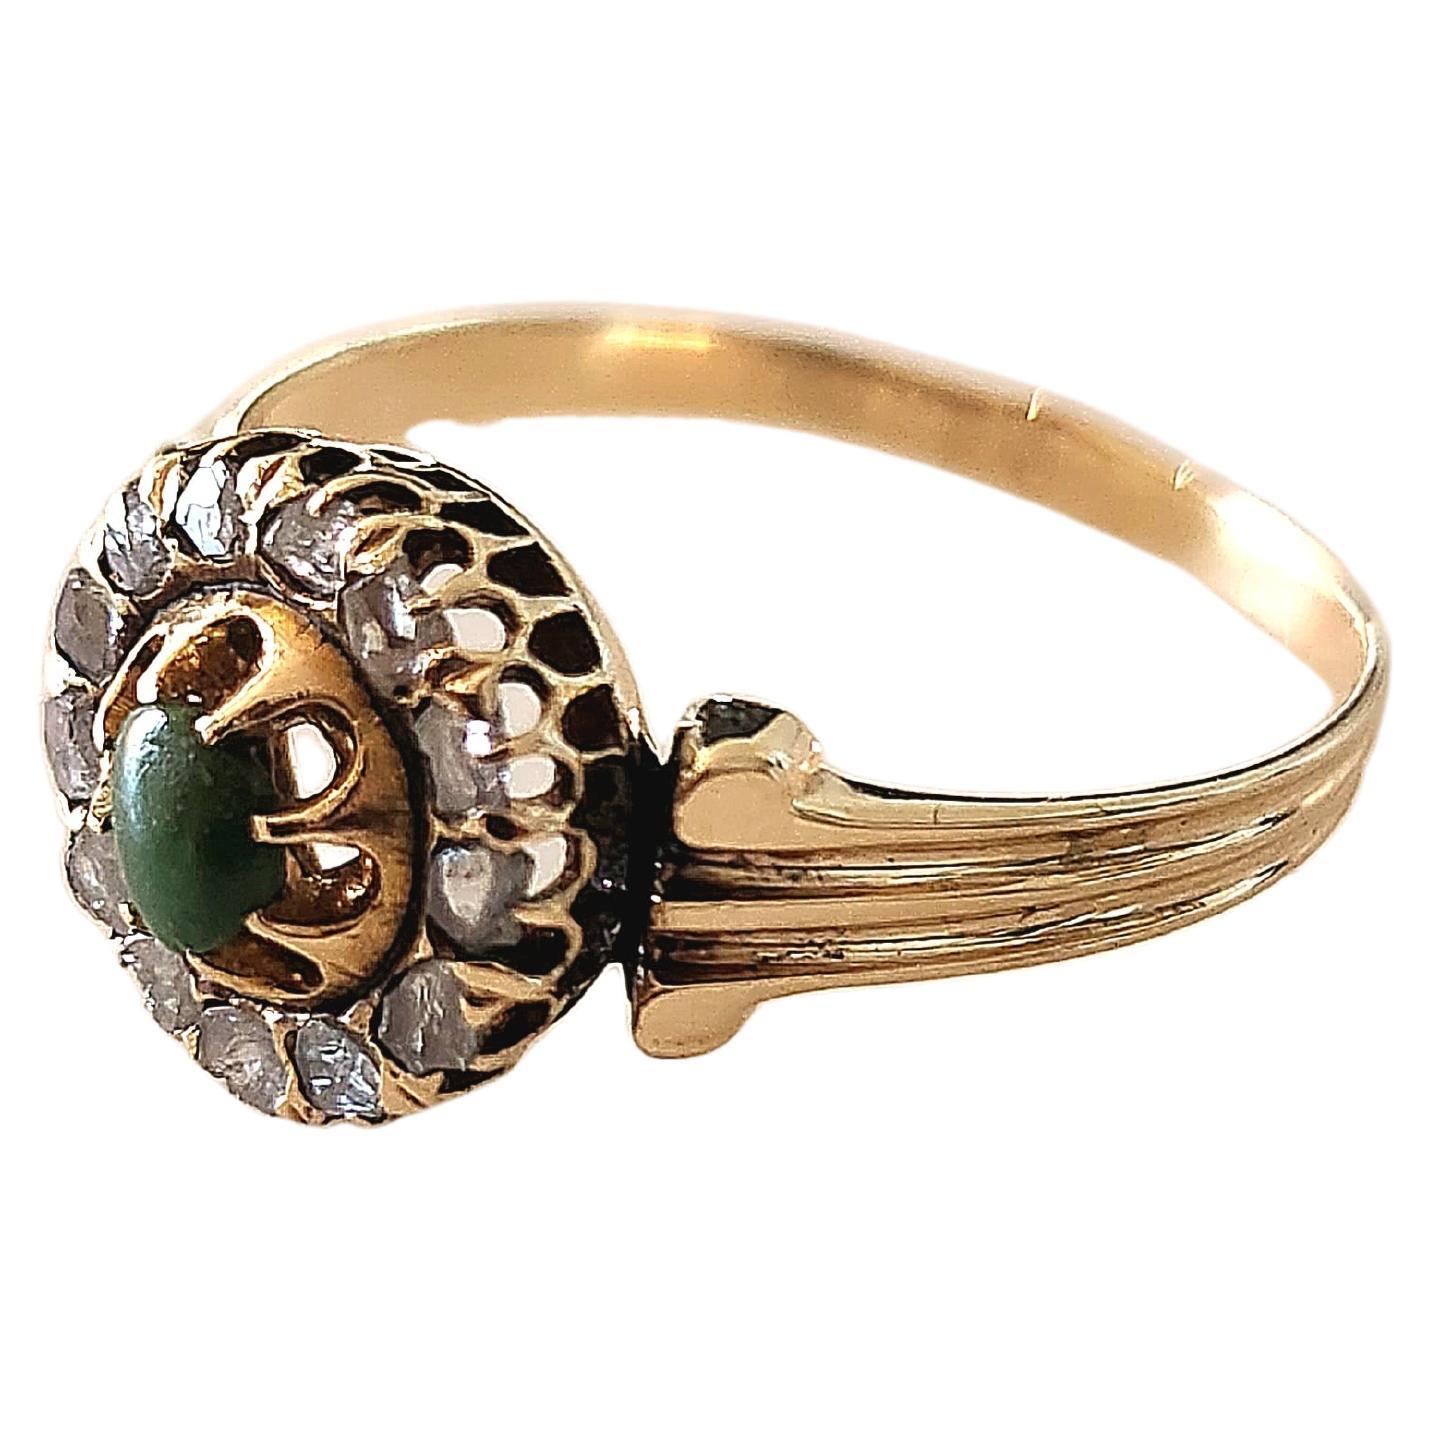 Antique imperial russian era 1880s 14k gold ring centered with green apple terqouise color flanked with rose cut diamonds made in st petersburg  hall marked 56 imperial russian gold standard and st petersburg assay mark